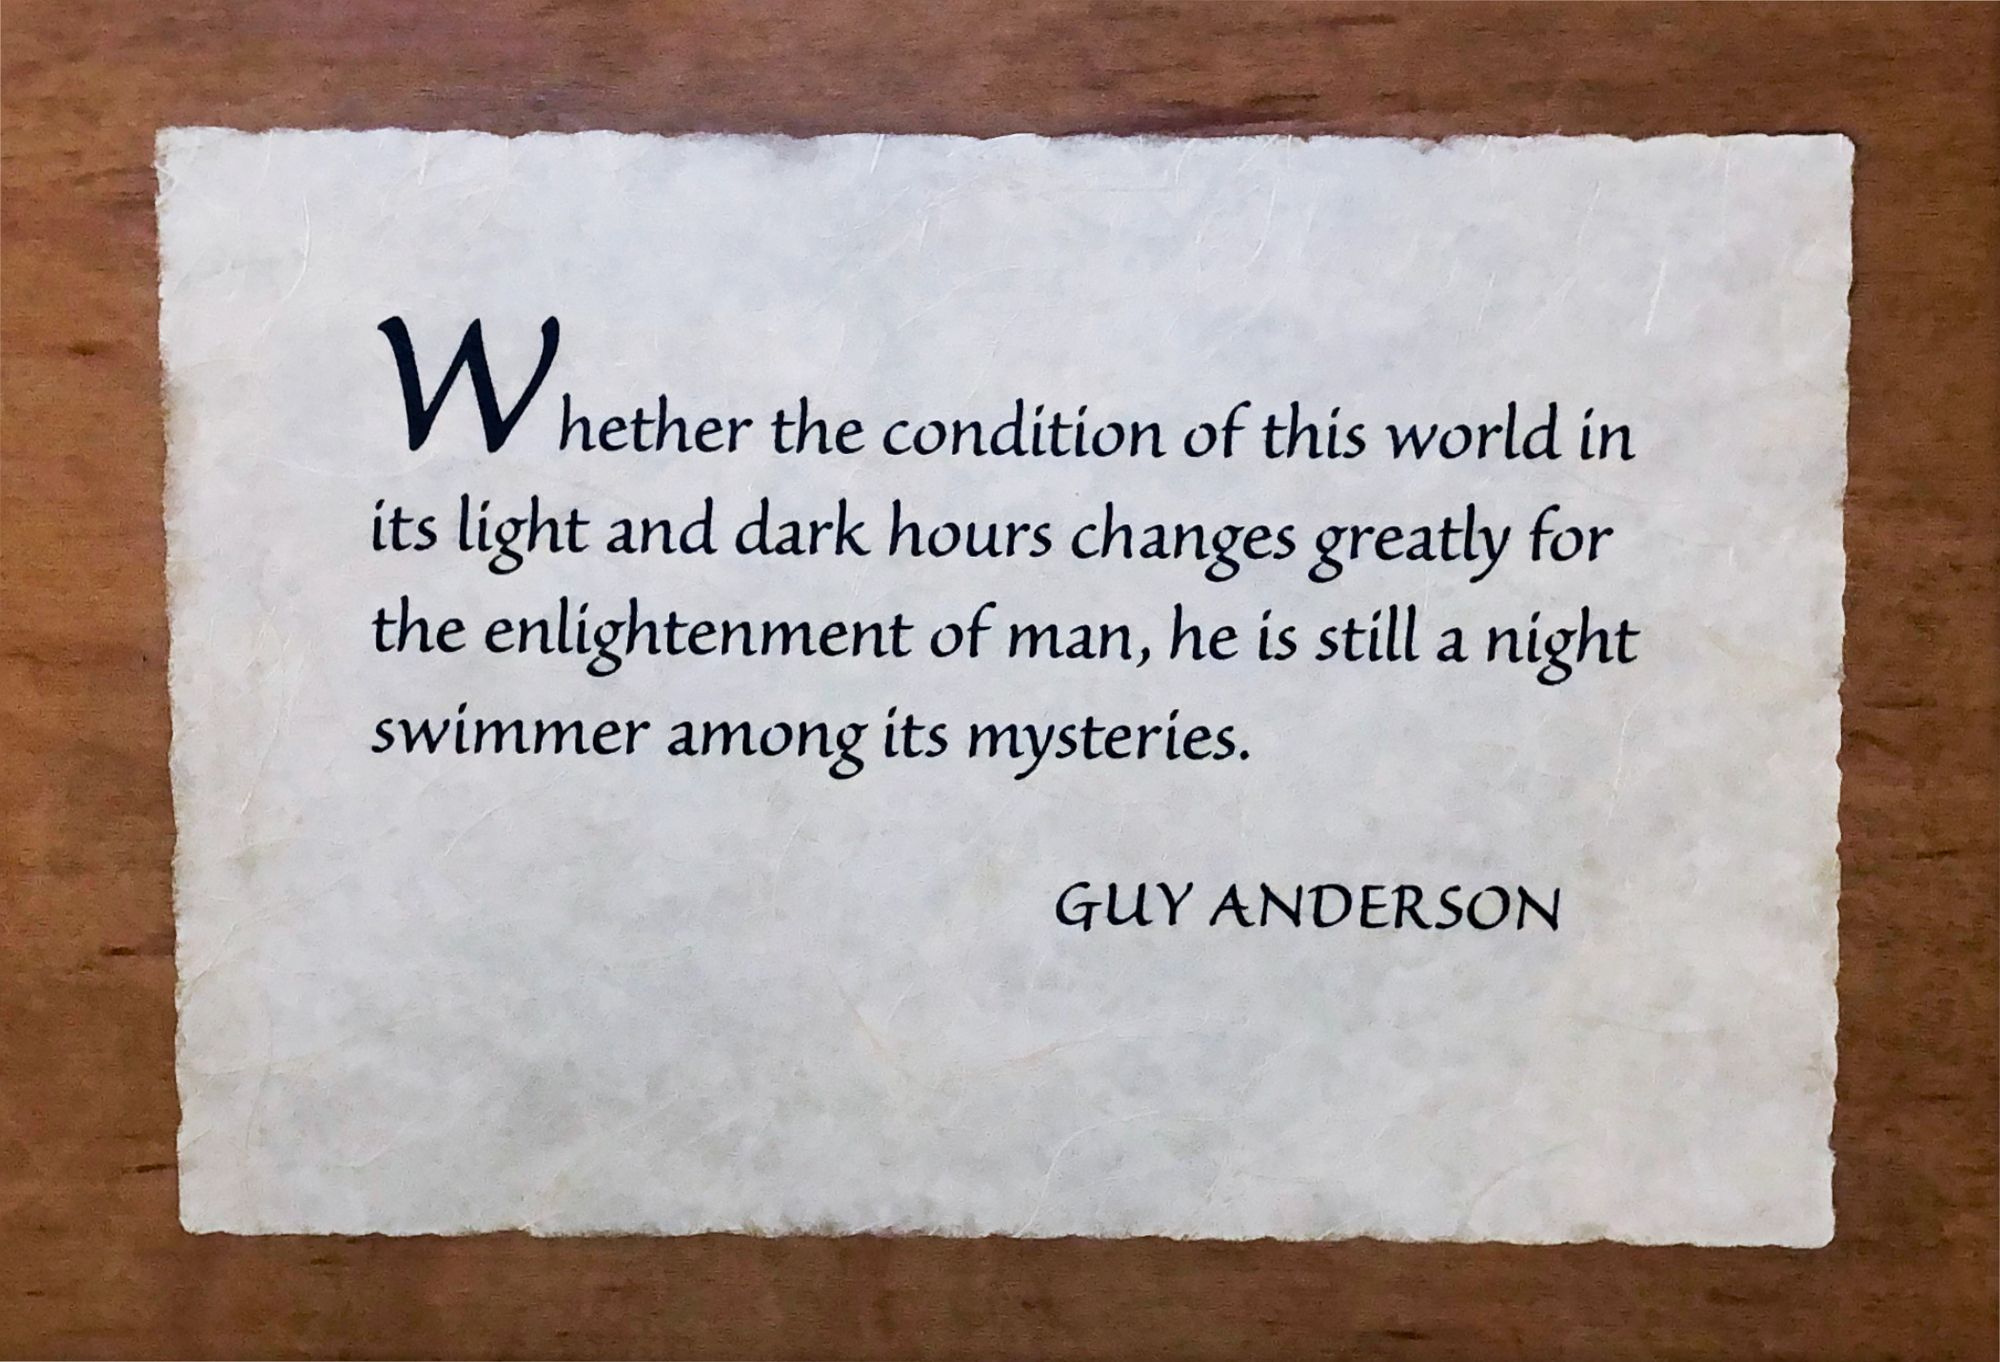 Photo of wooden plaque with Guy Anderson quote: “Whether the condition of this world in its light and dark hours changes greatly for the enlightenment of man, he is still a night swimmer among its mysteries.” 